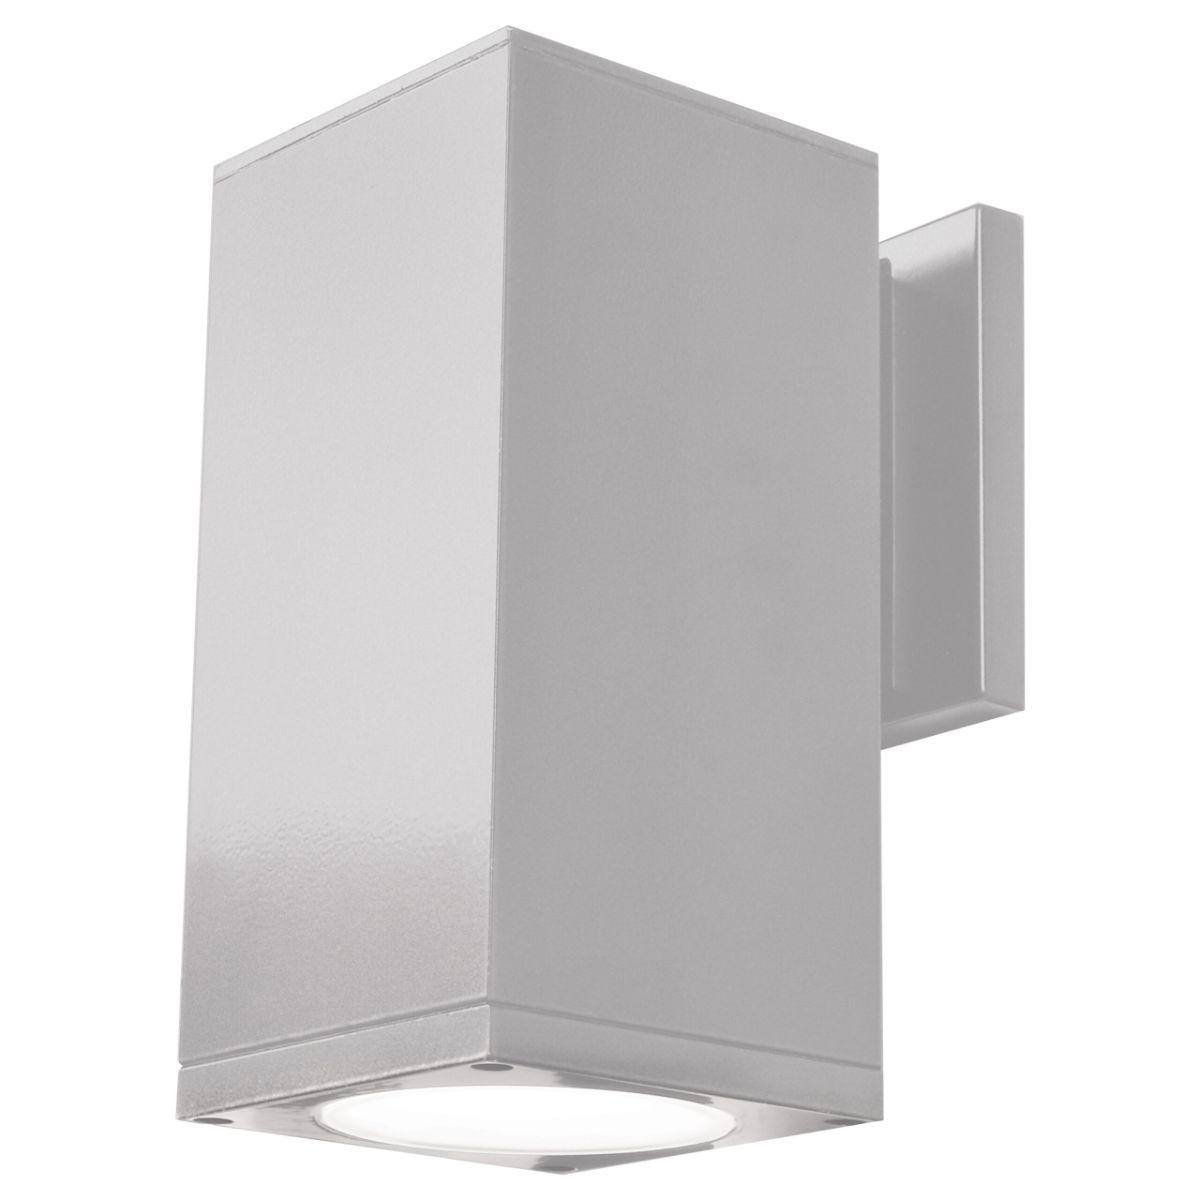 Bayside 8 in. LED Outdoor Wall Sconce - Bees Lighting